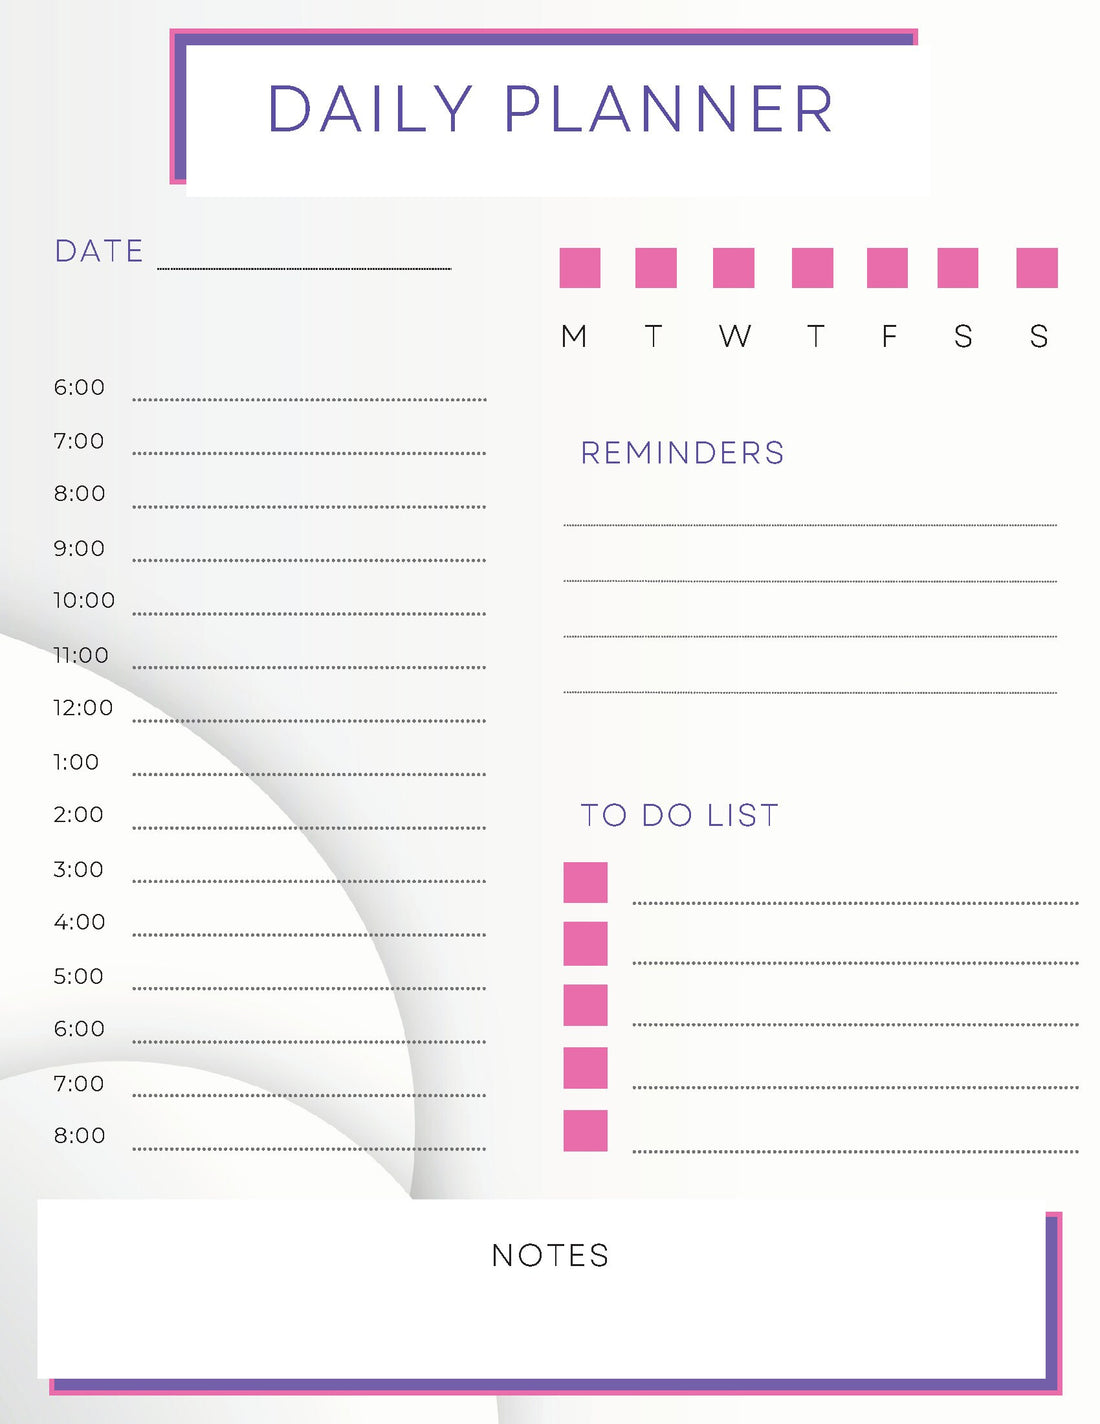 Daily Planner Notepad, Daily Organizer, Purple Planner, Daily Scheduler, Notepad